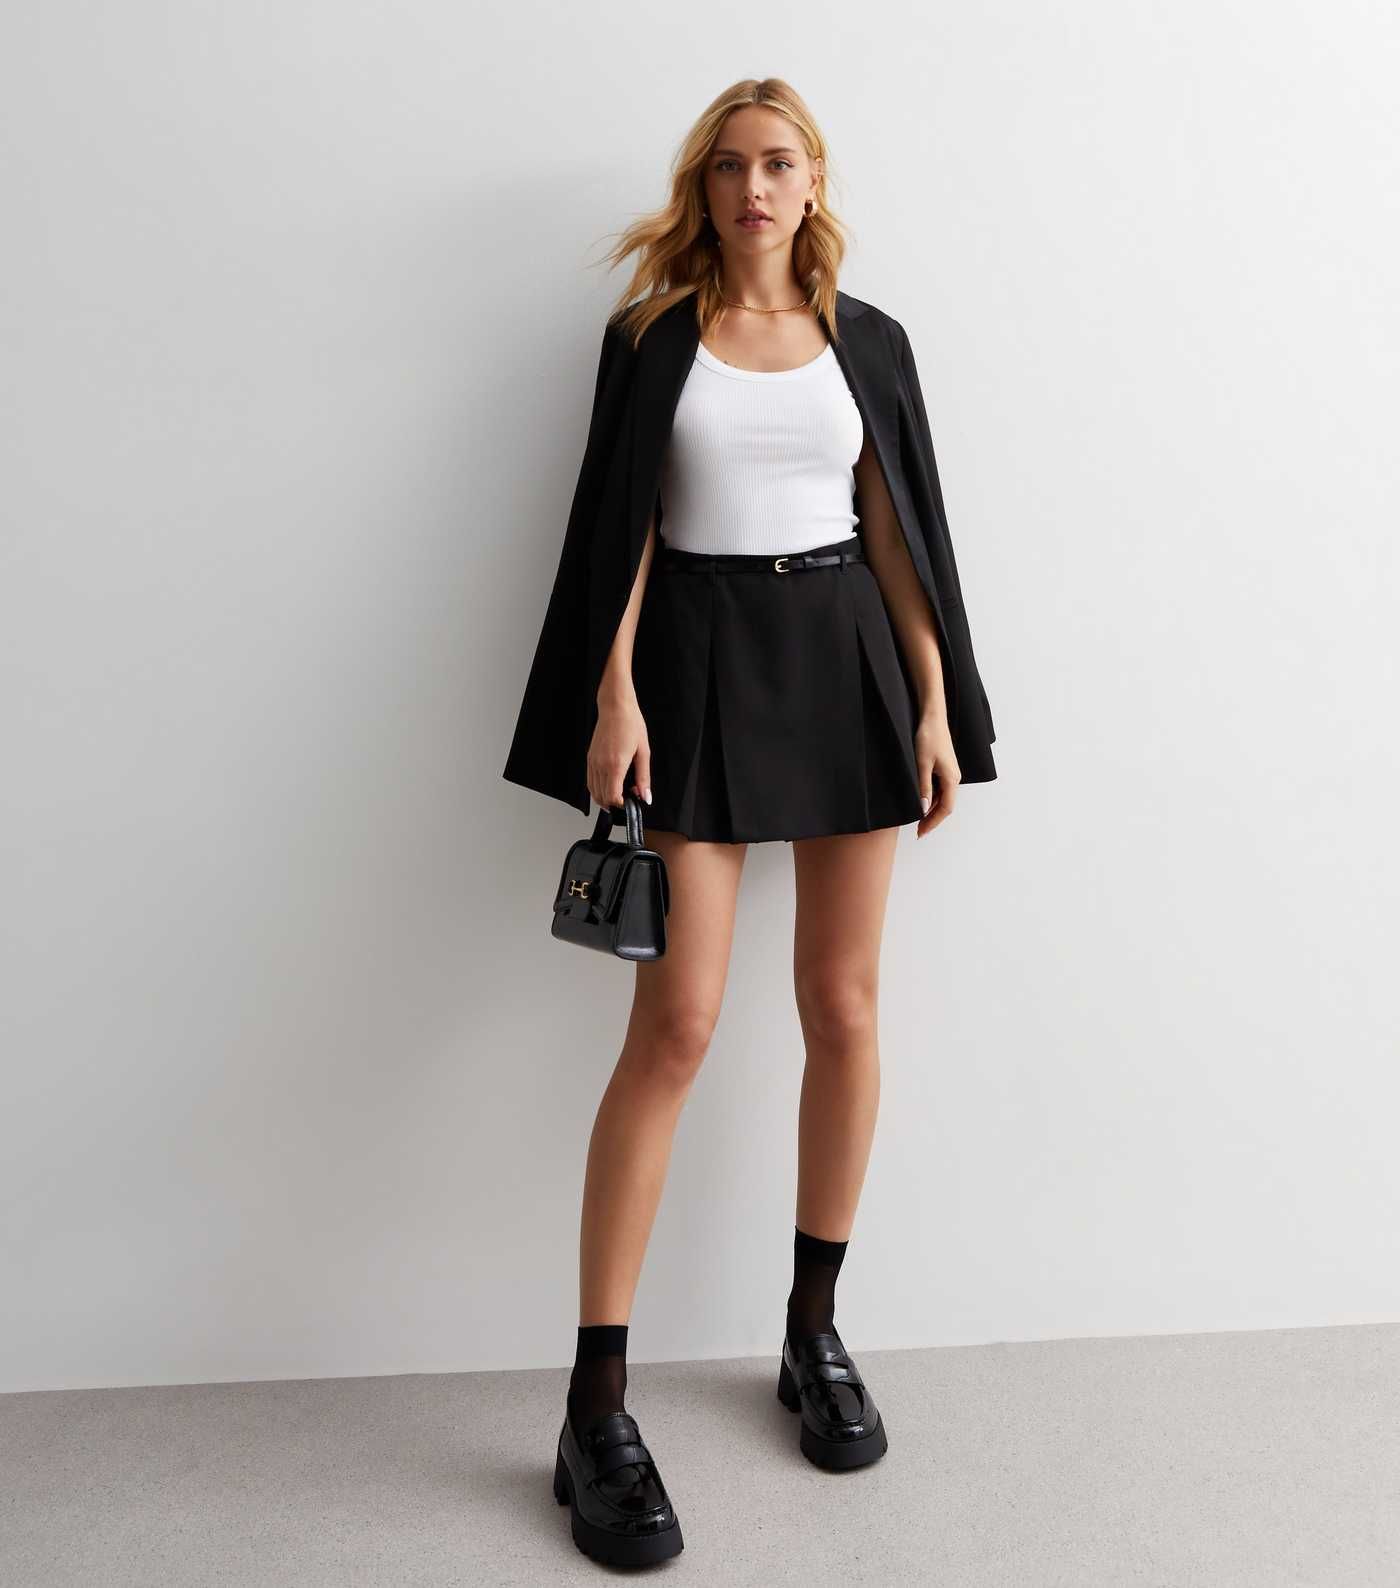 Black Belted Skort
						
						Add to Saved Items
						Remove from Saved Items | New Look (UK)